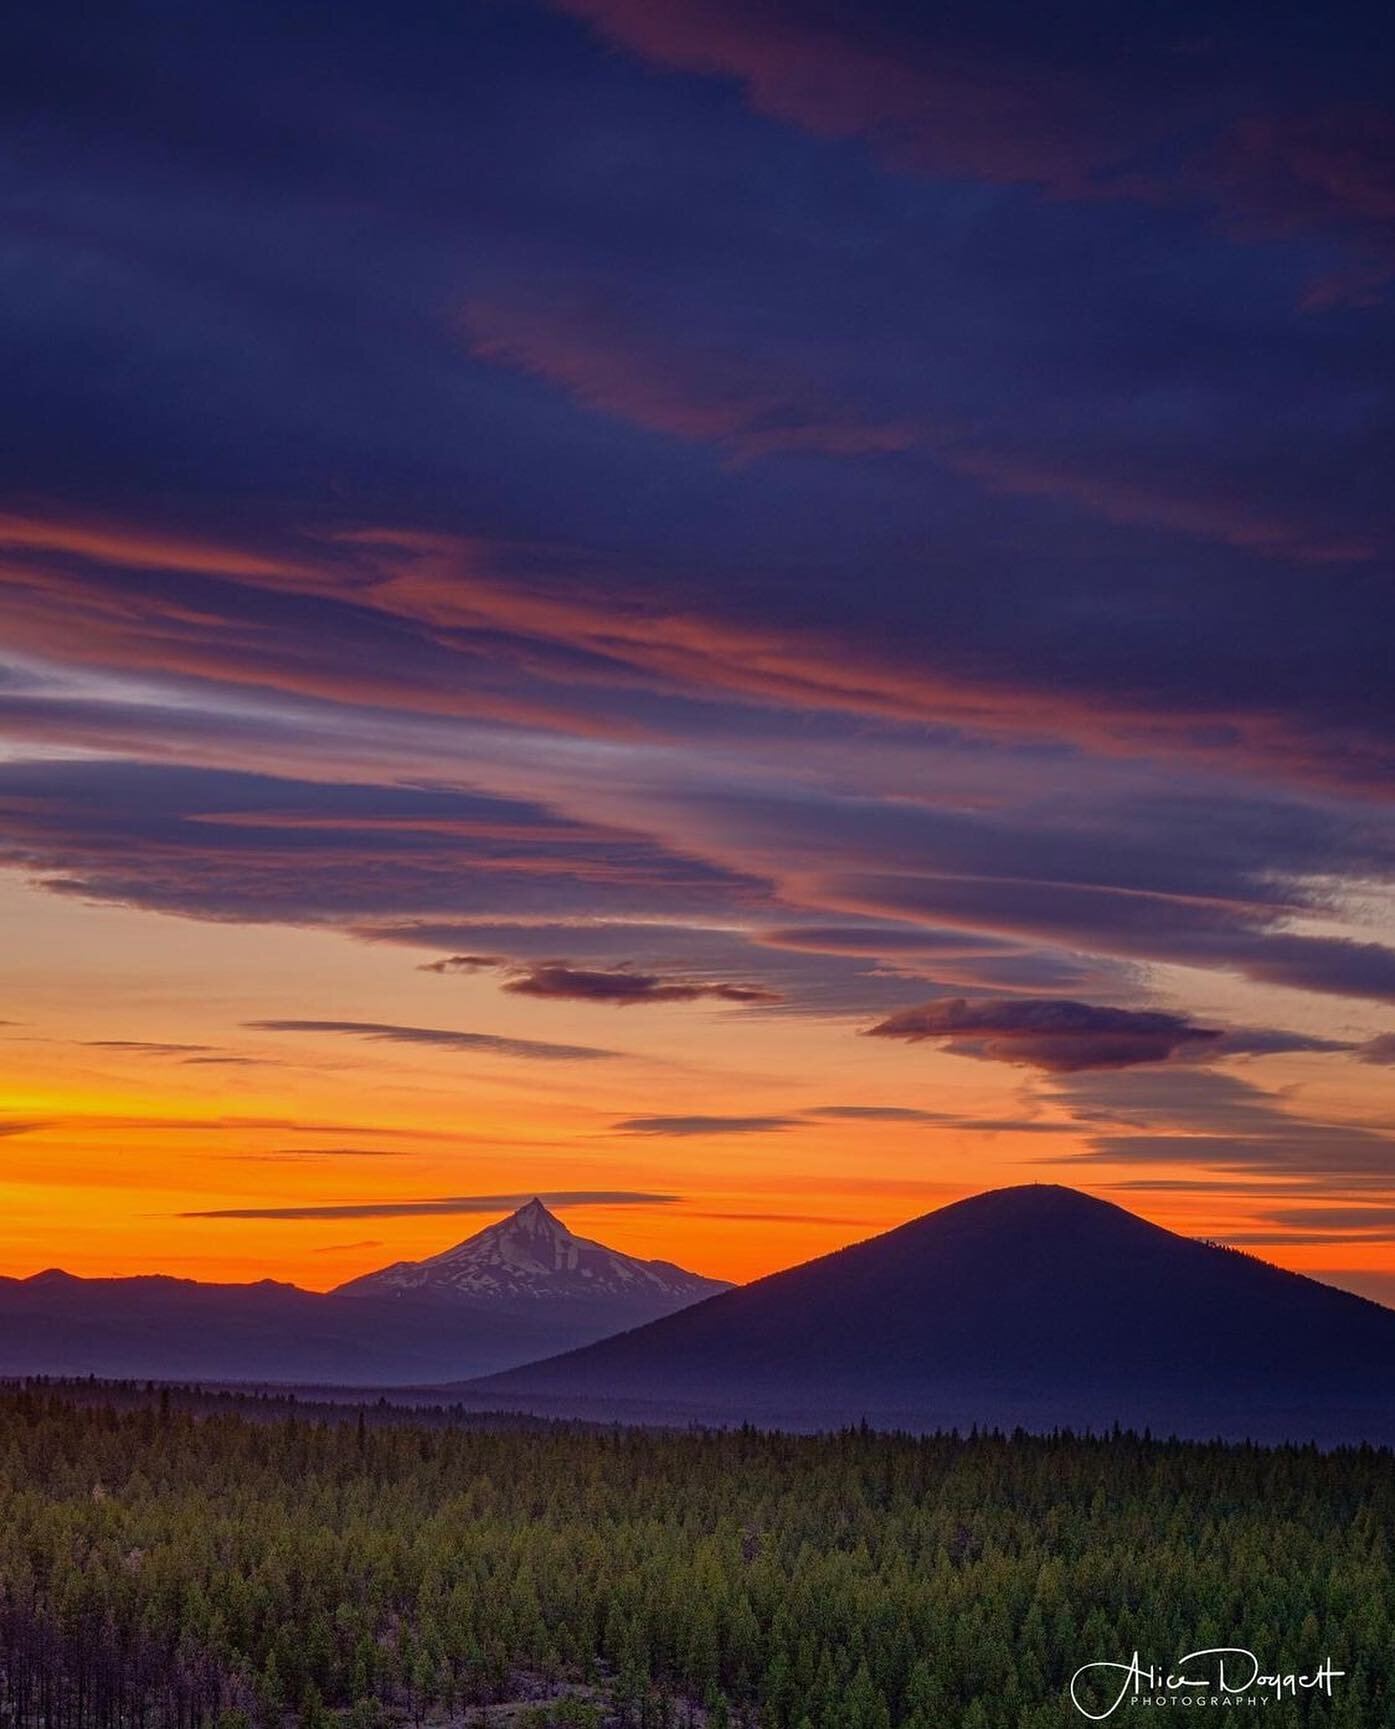 Coming off a busy weekend, it&rsquo;s always nice to take a breath and take in our epic Central Oregon sunsets, masterfully captured by @alicedoggett. 💕🏔

#sunsetvibes #photoeducation #bendphototours